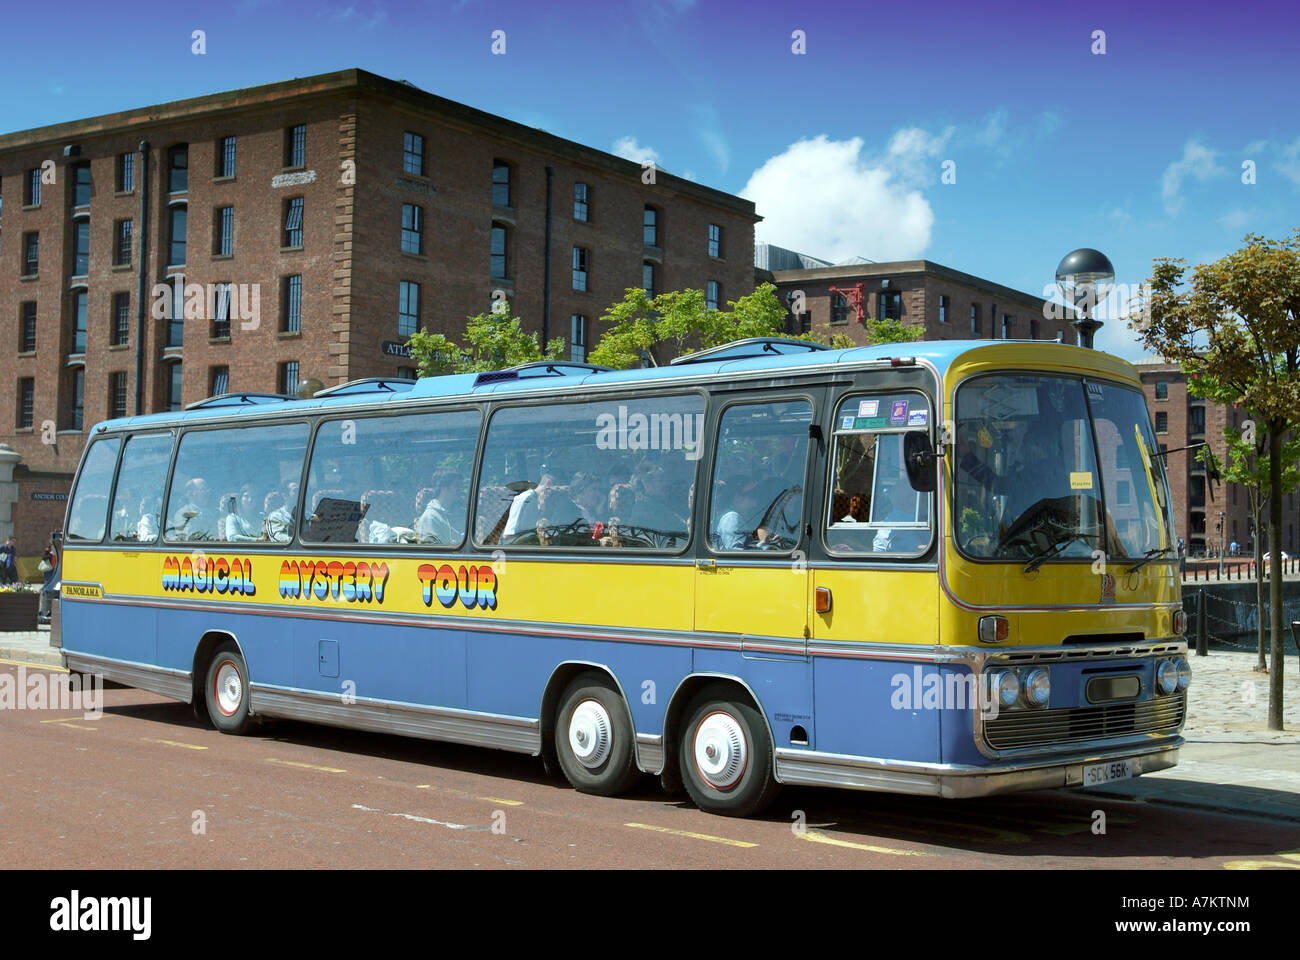 The Magical Mystery Tour bus made famous in the Beatles film of the same name. Stock Photo